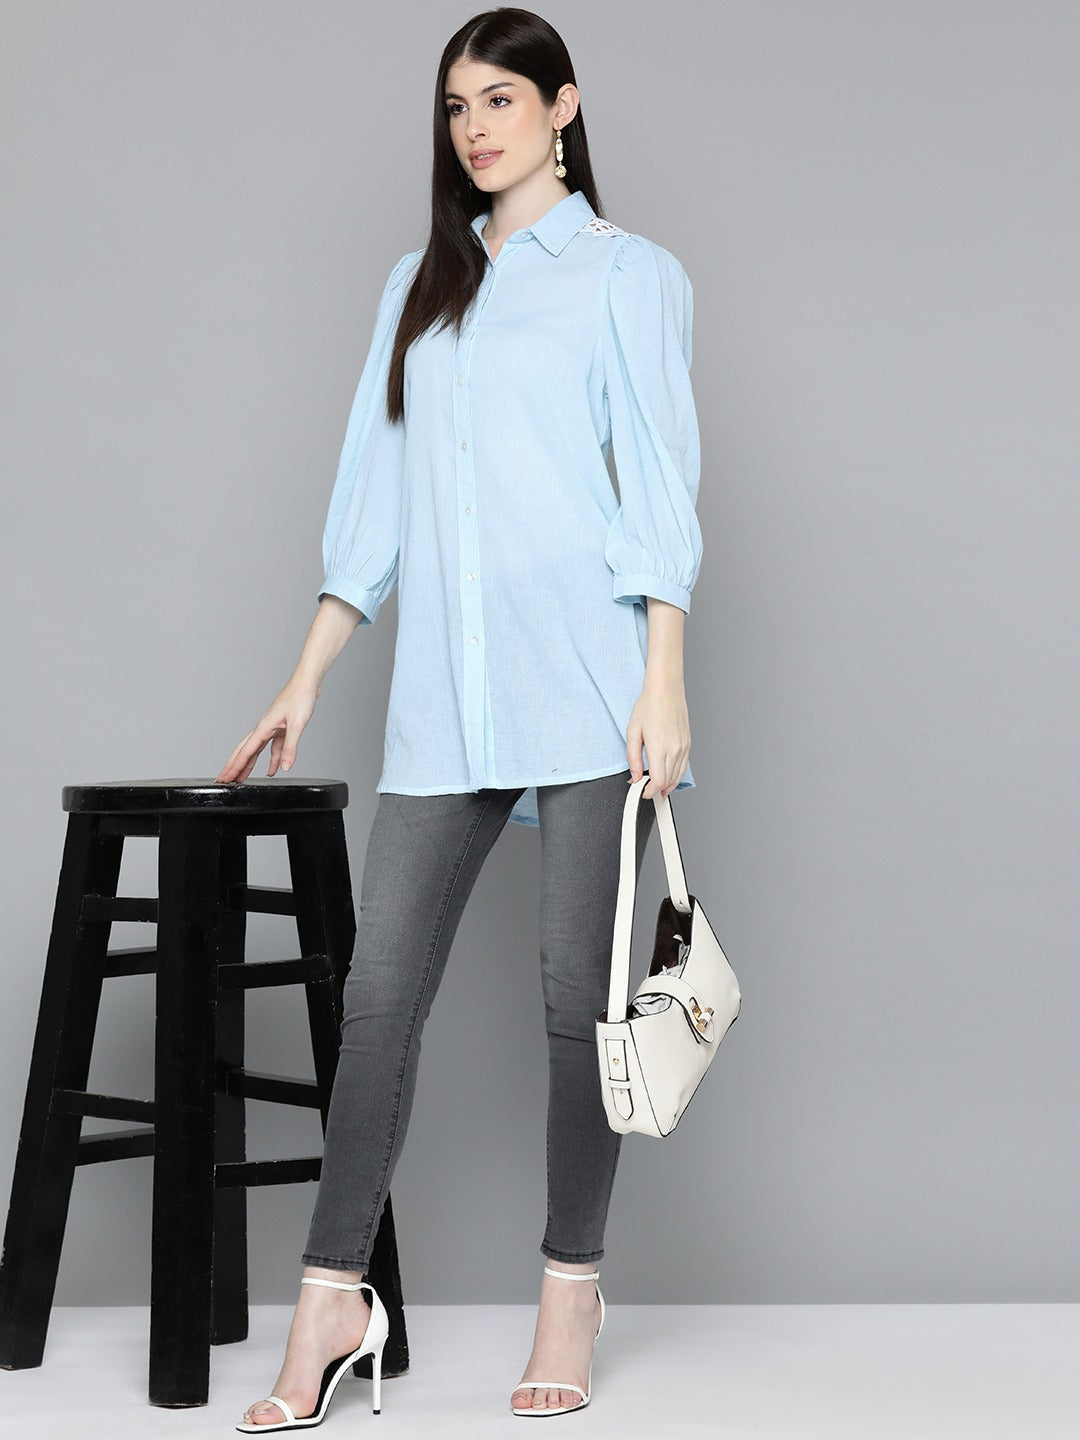 Light Blue Solid Shirt Tunic With Lace Insert